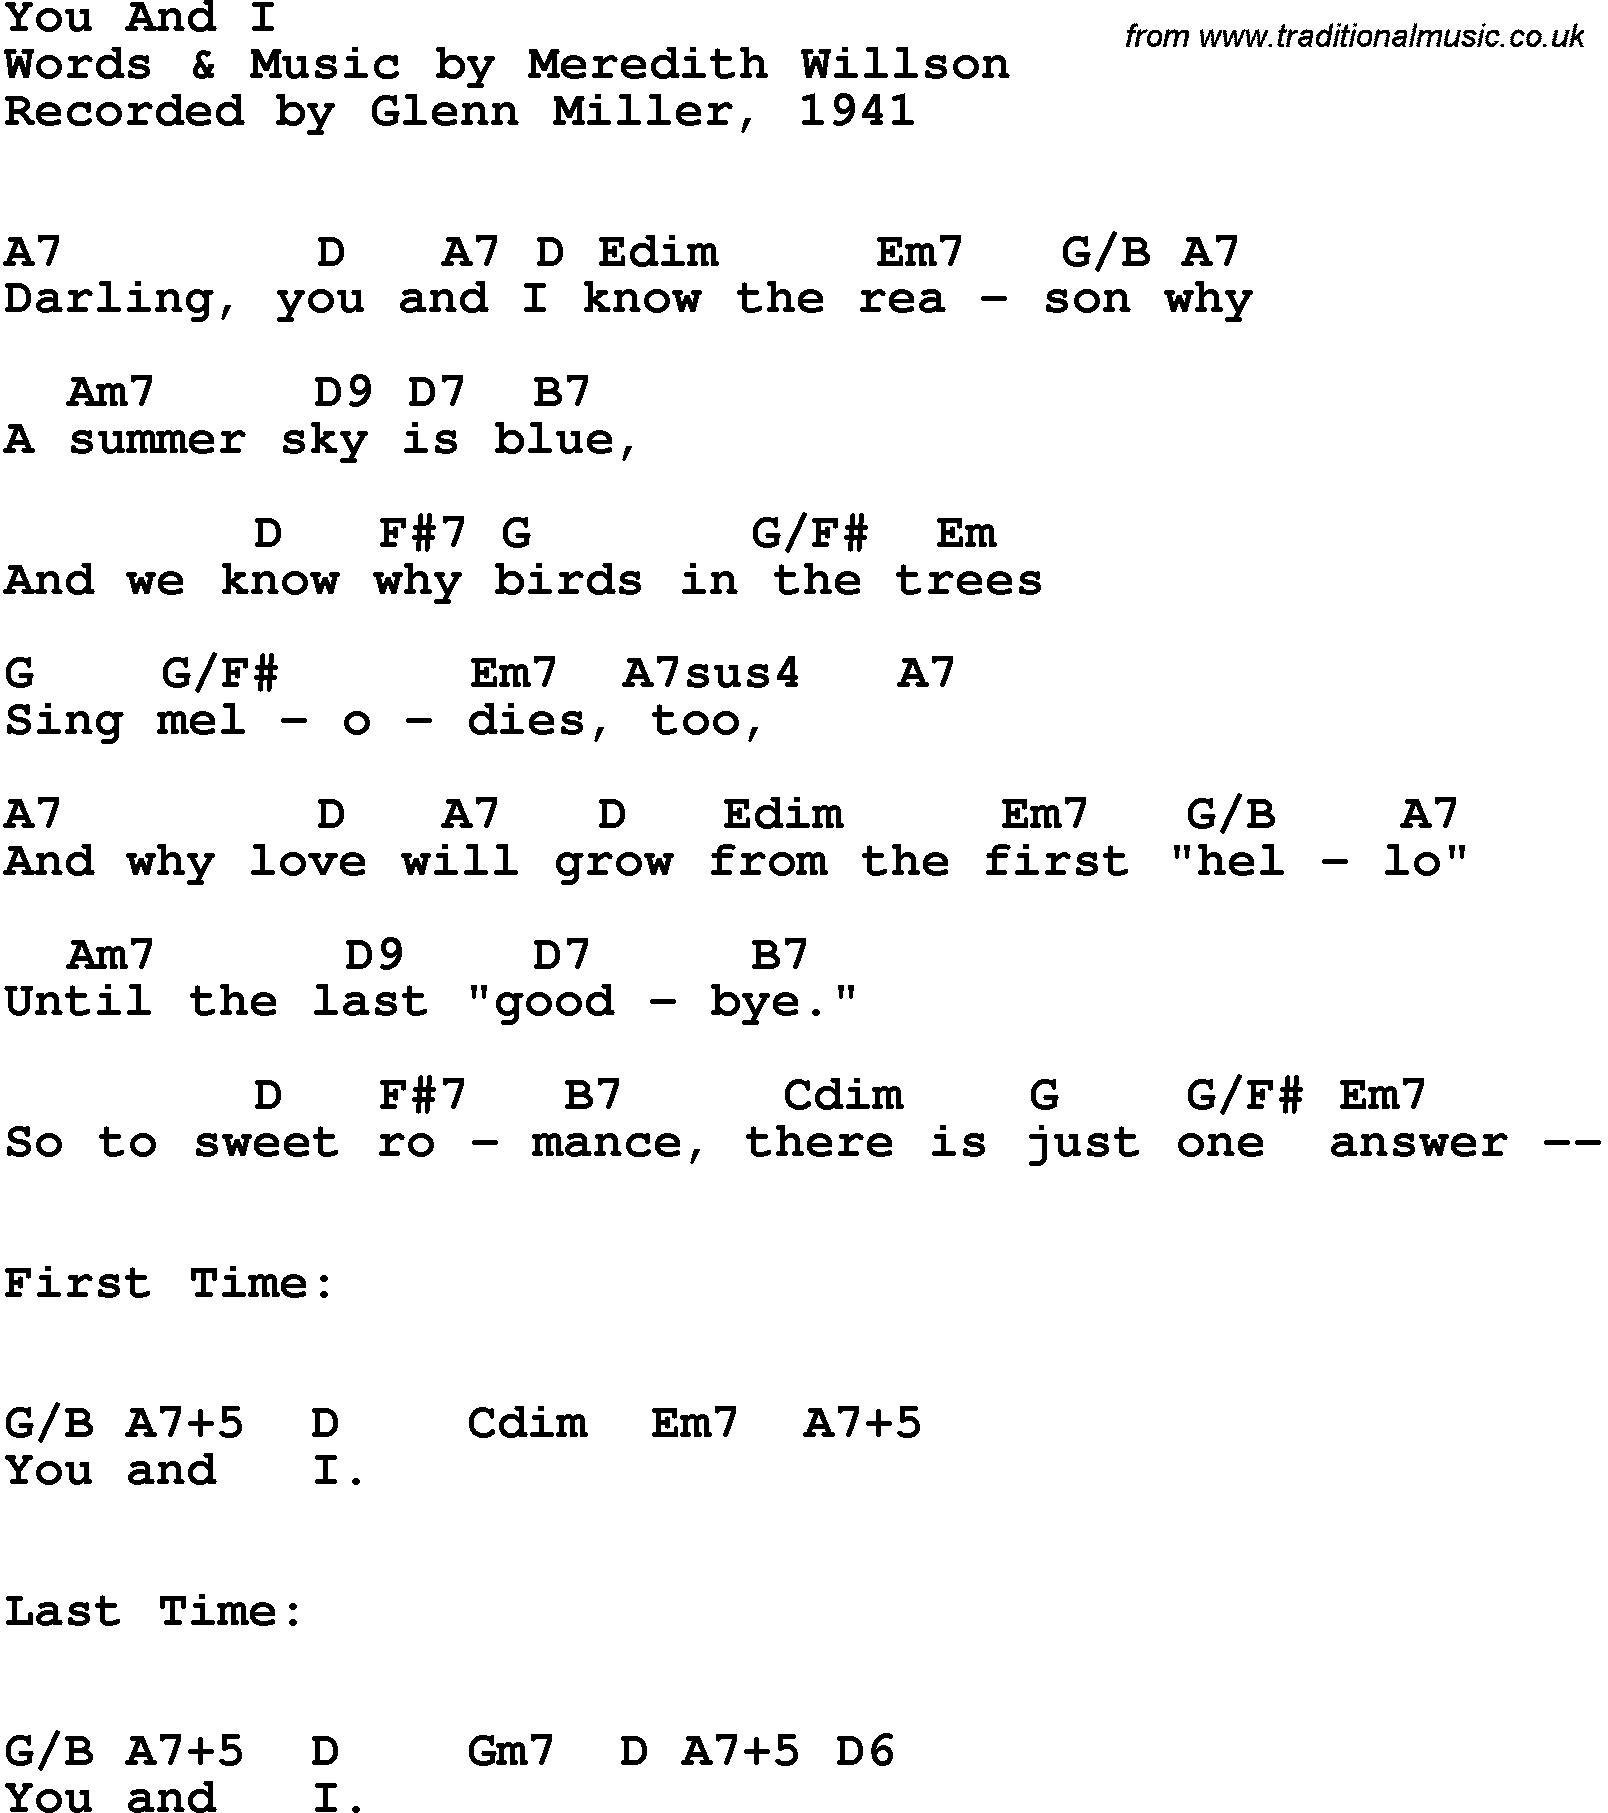 Song Lyrics with guitar chords for You And I - Glenn Miller, 1941